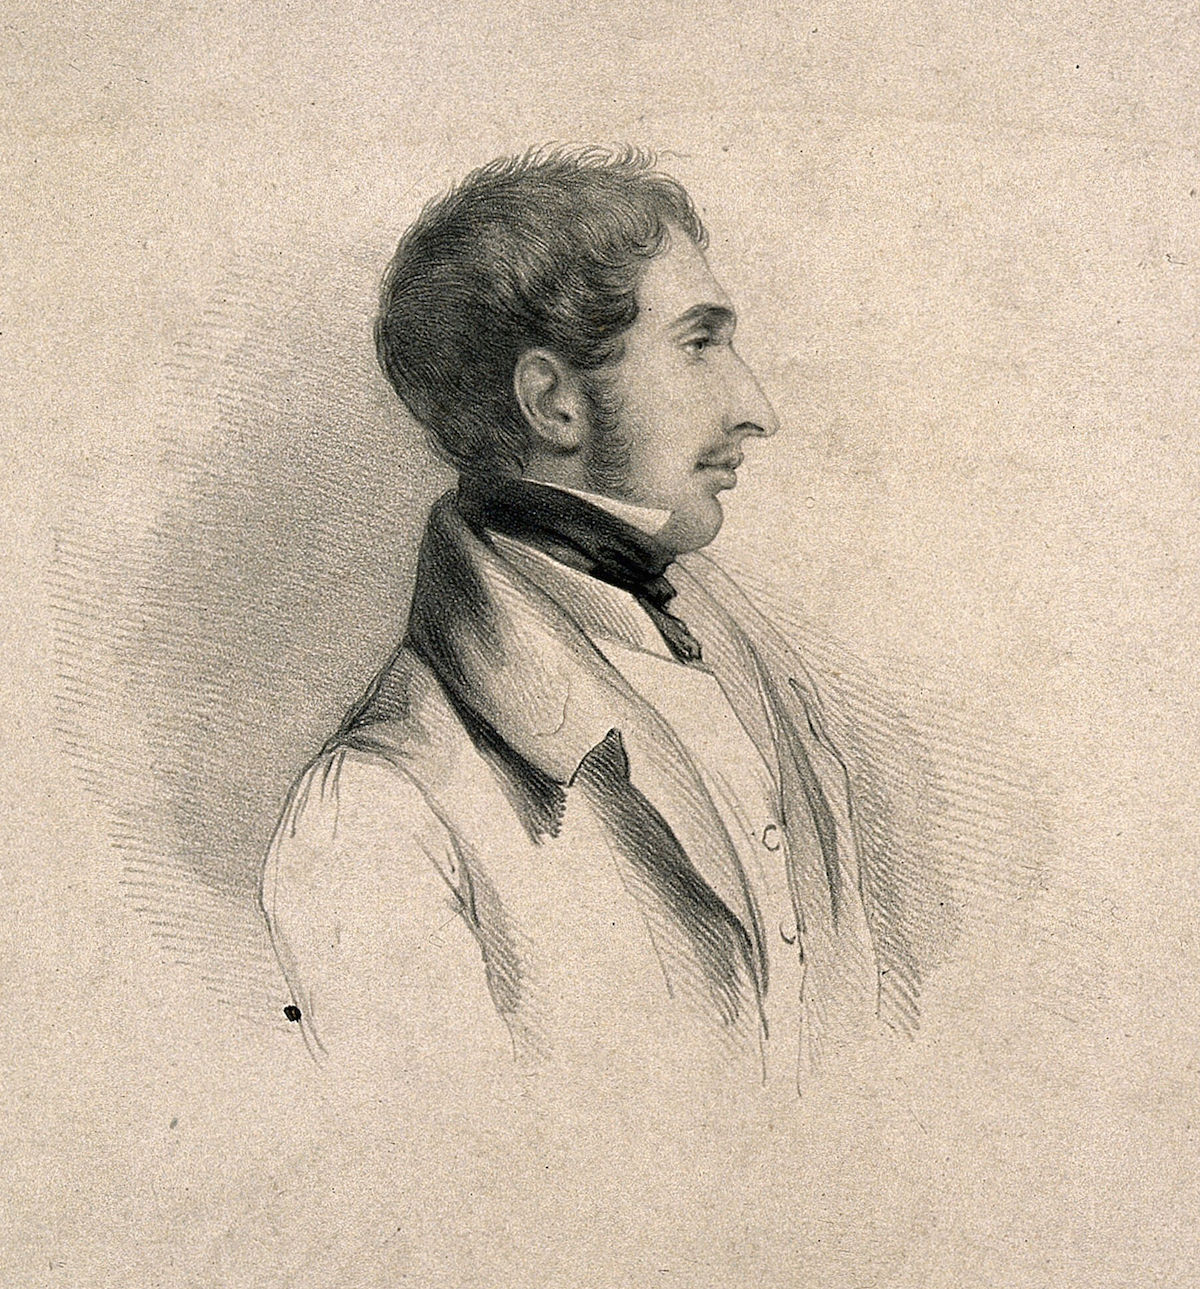 Robert Fitzroy, lithograph, 1835. Wellcome Collection. Public Domain.